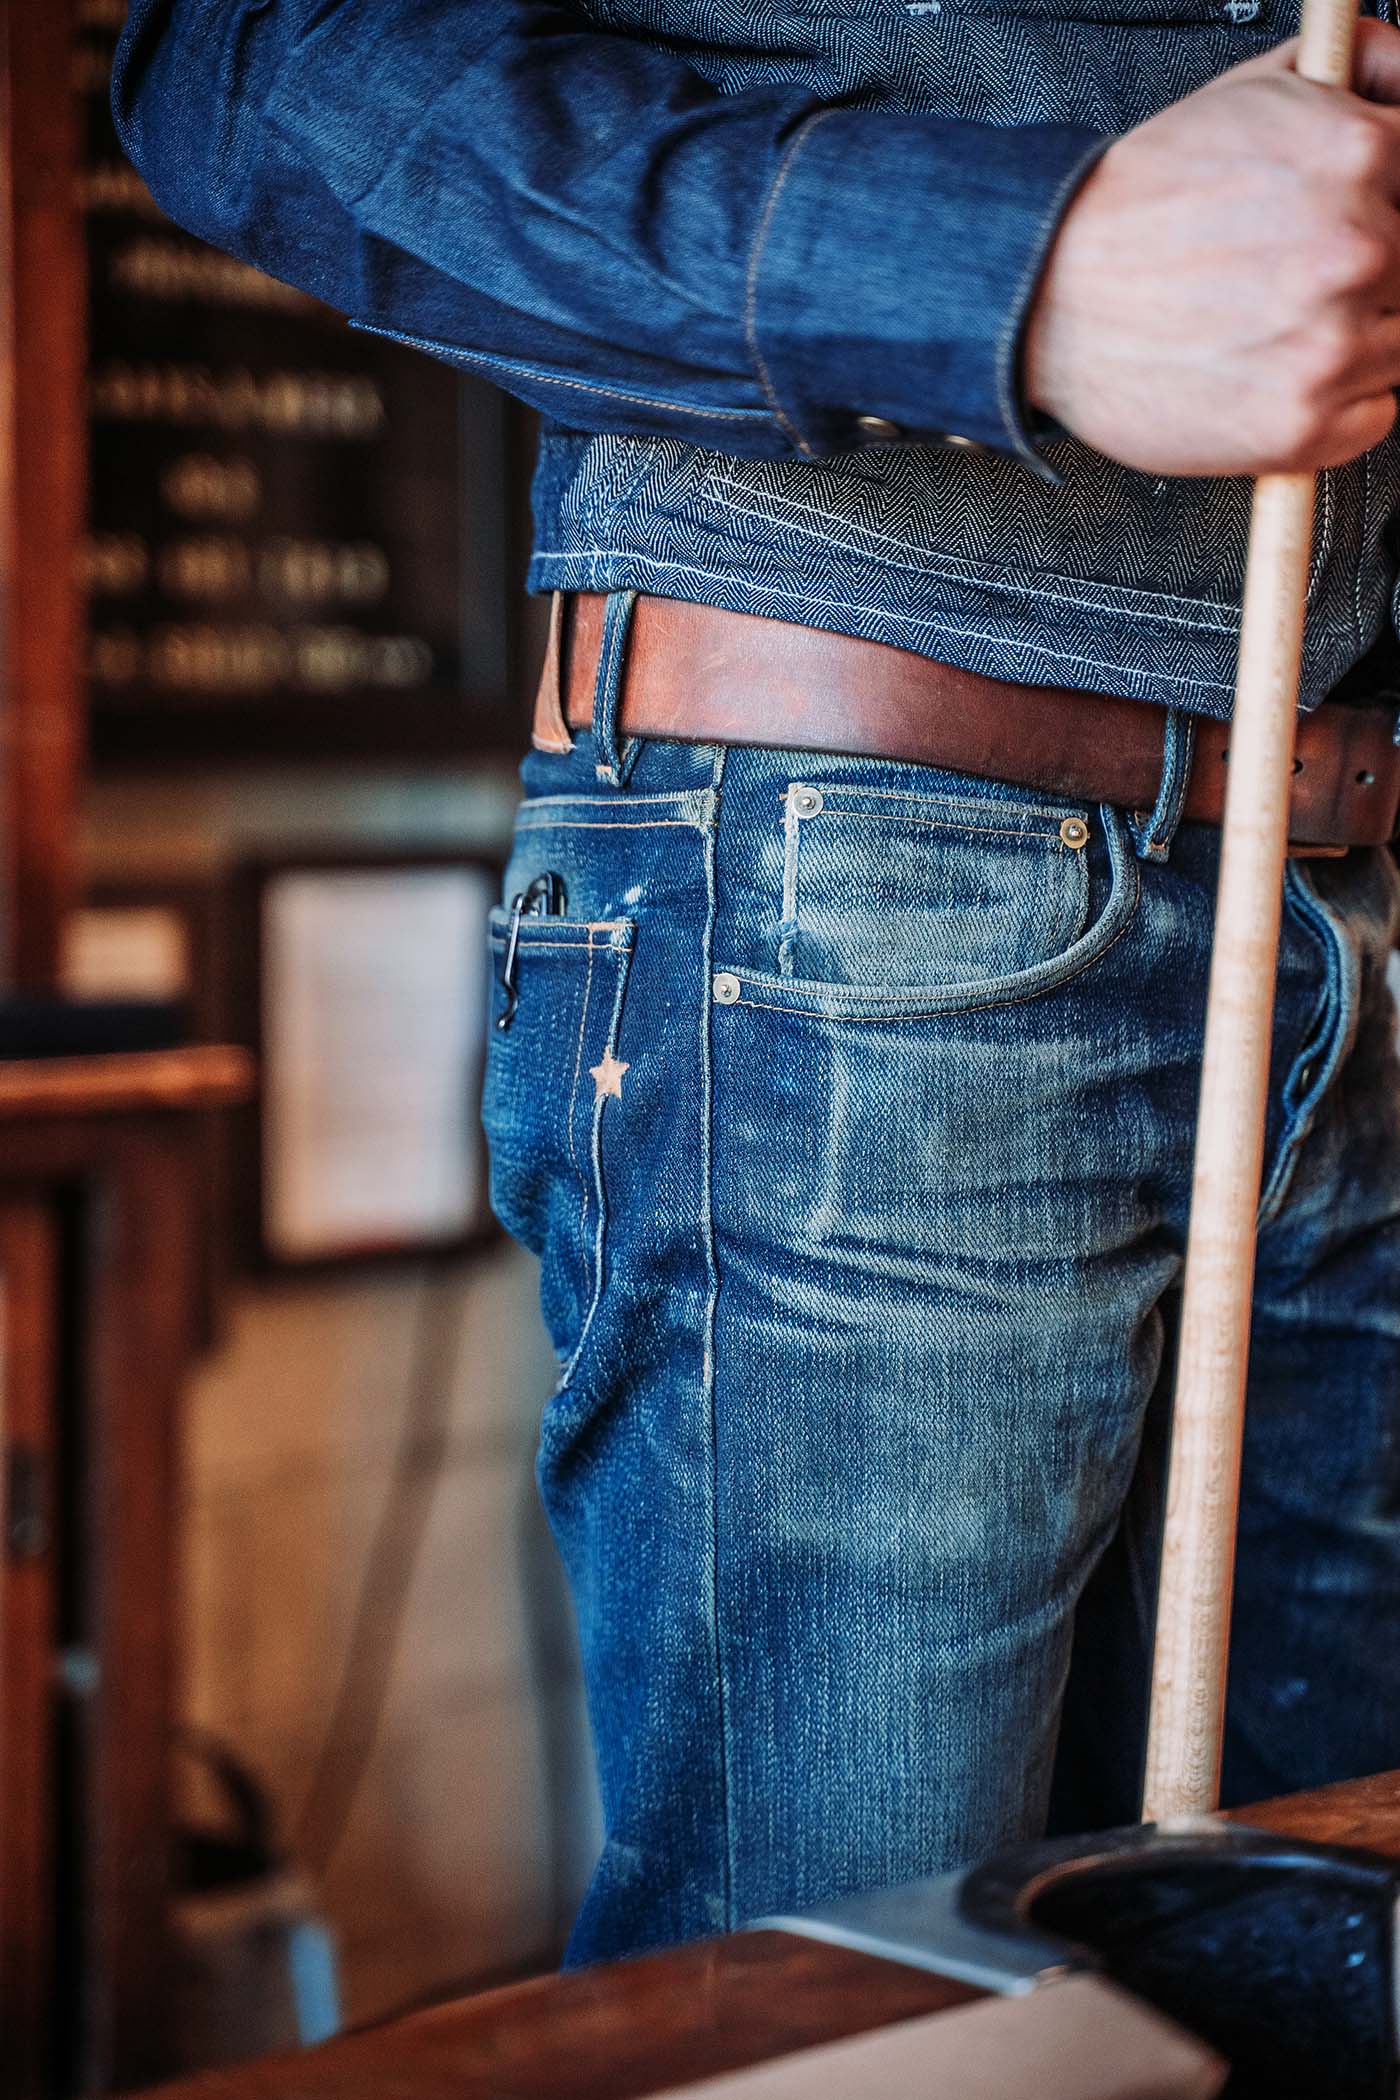 The Slim Straight 21.5oz Gauntlet Heavyweight Selvage - Brave Star Selvage